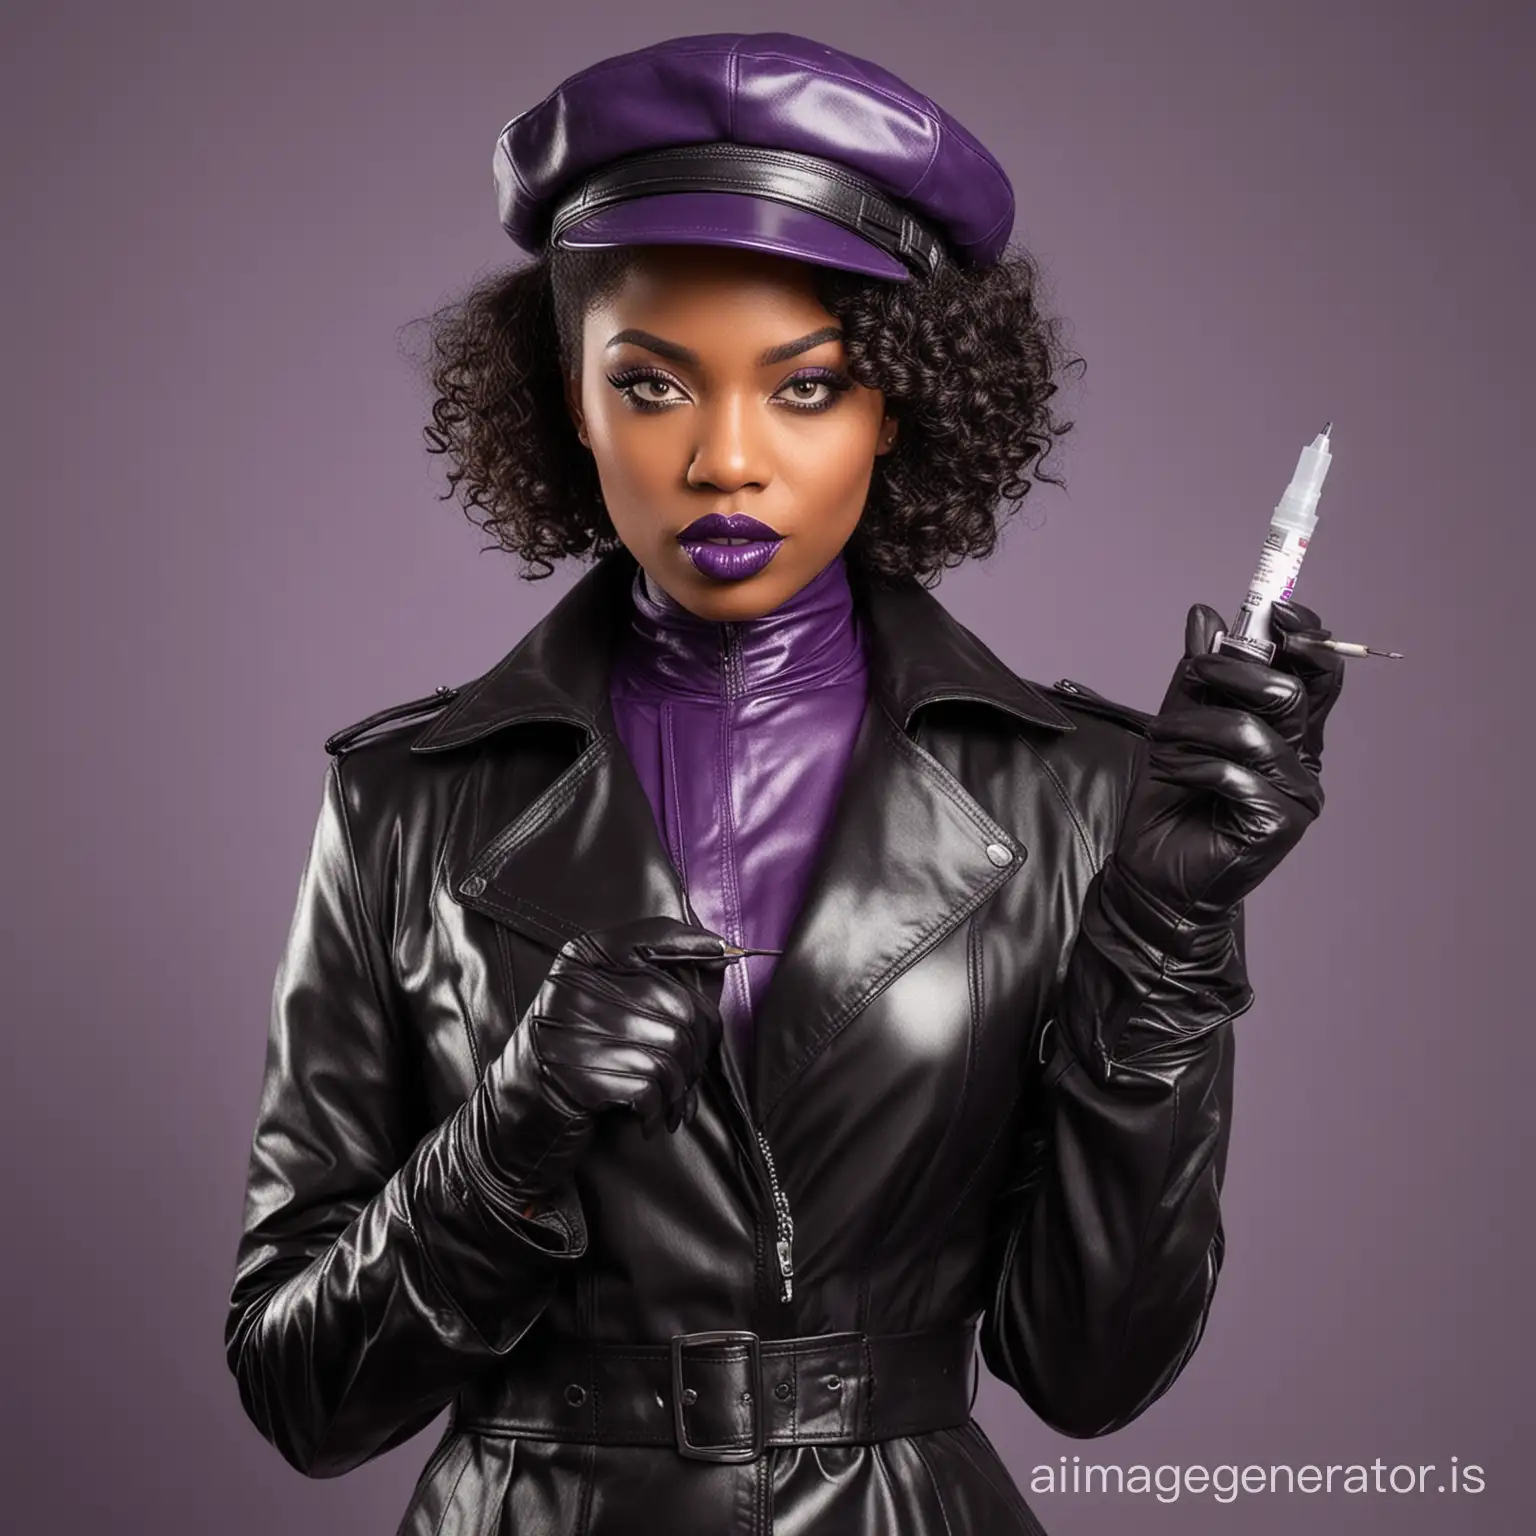 mad scientist black woman in leather gloves, holding syringe, leather trench coat and purple lipstick, leather masters cap